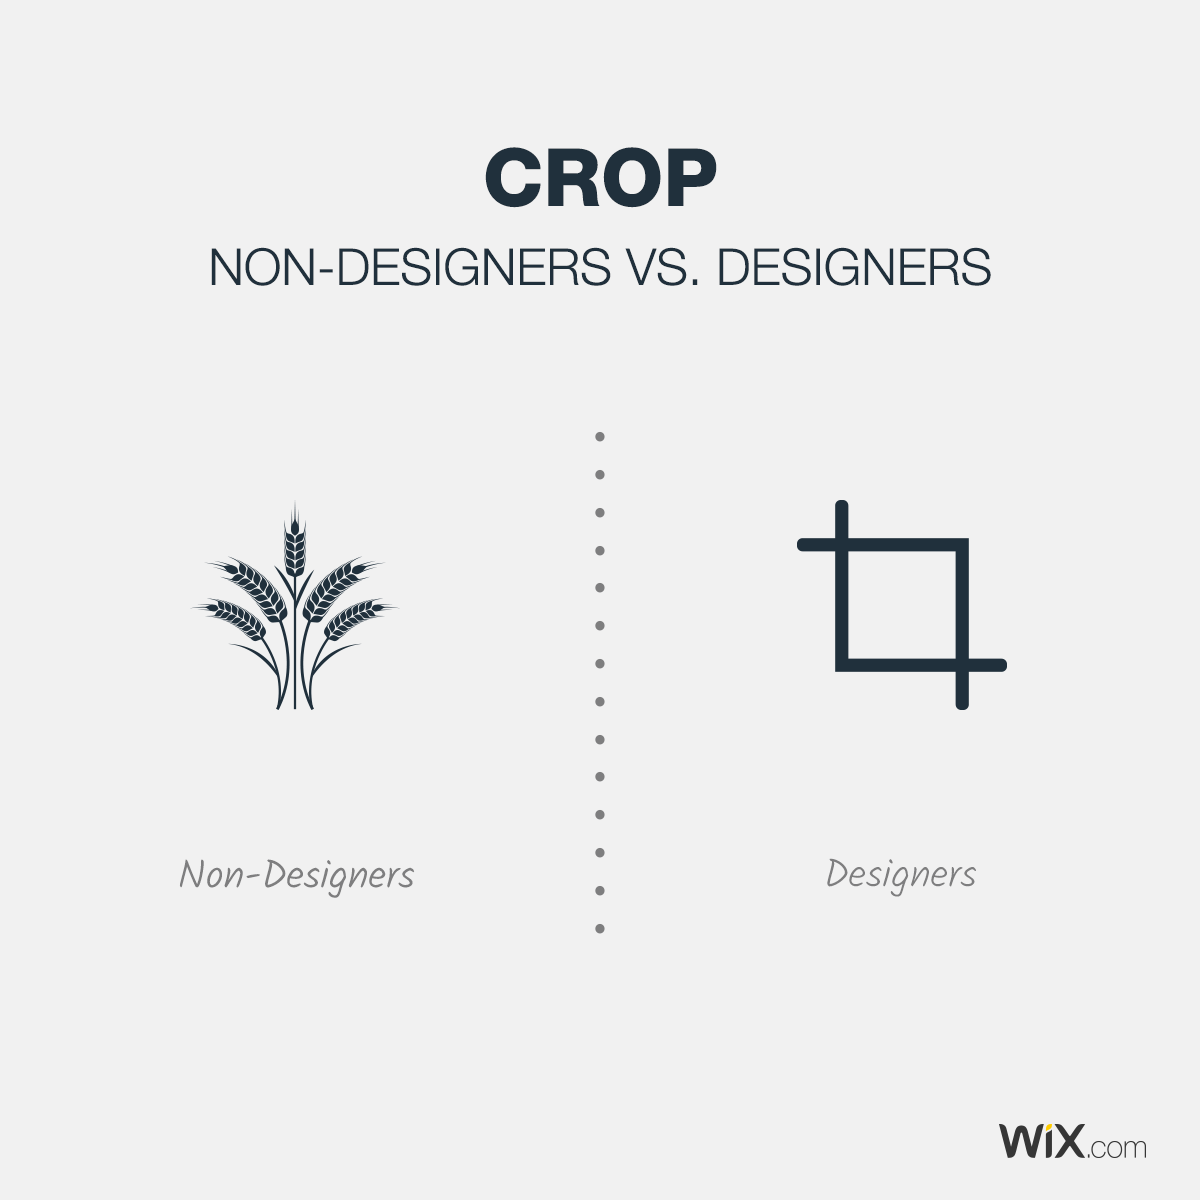 Differences Between Designers and Non-Designers - Crop